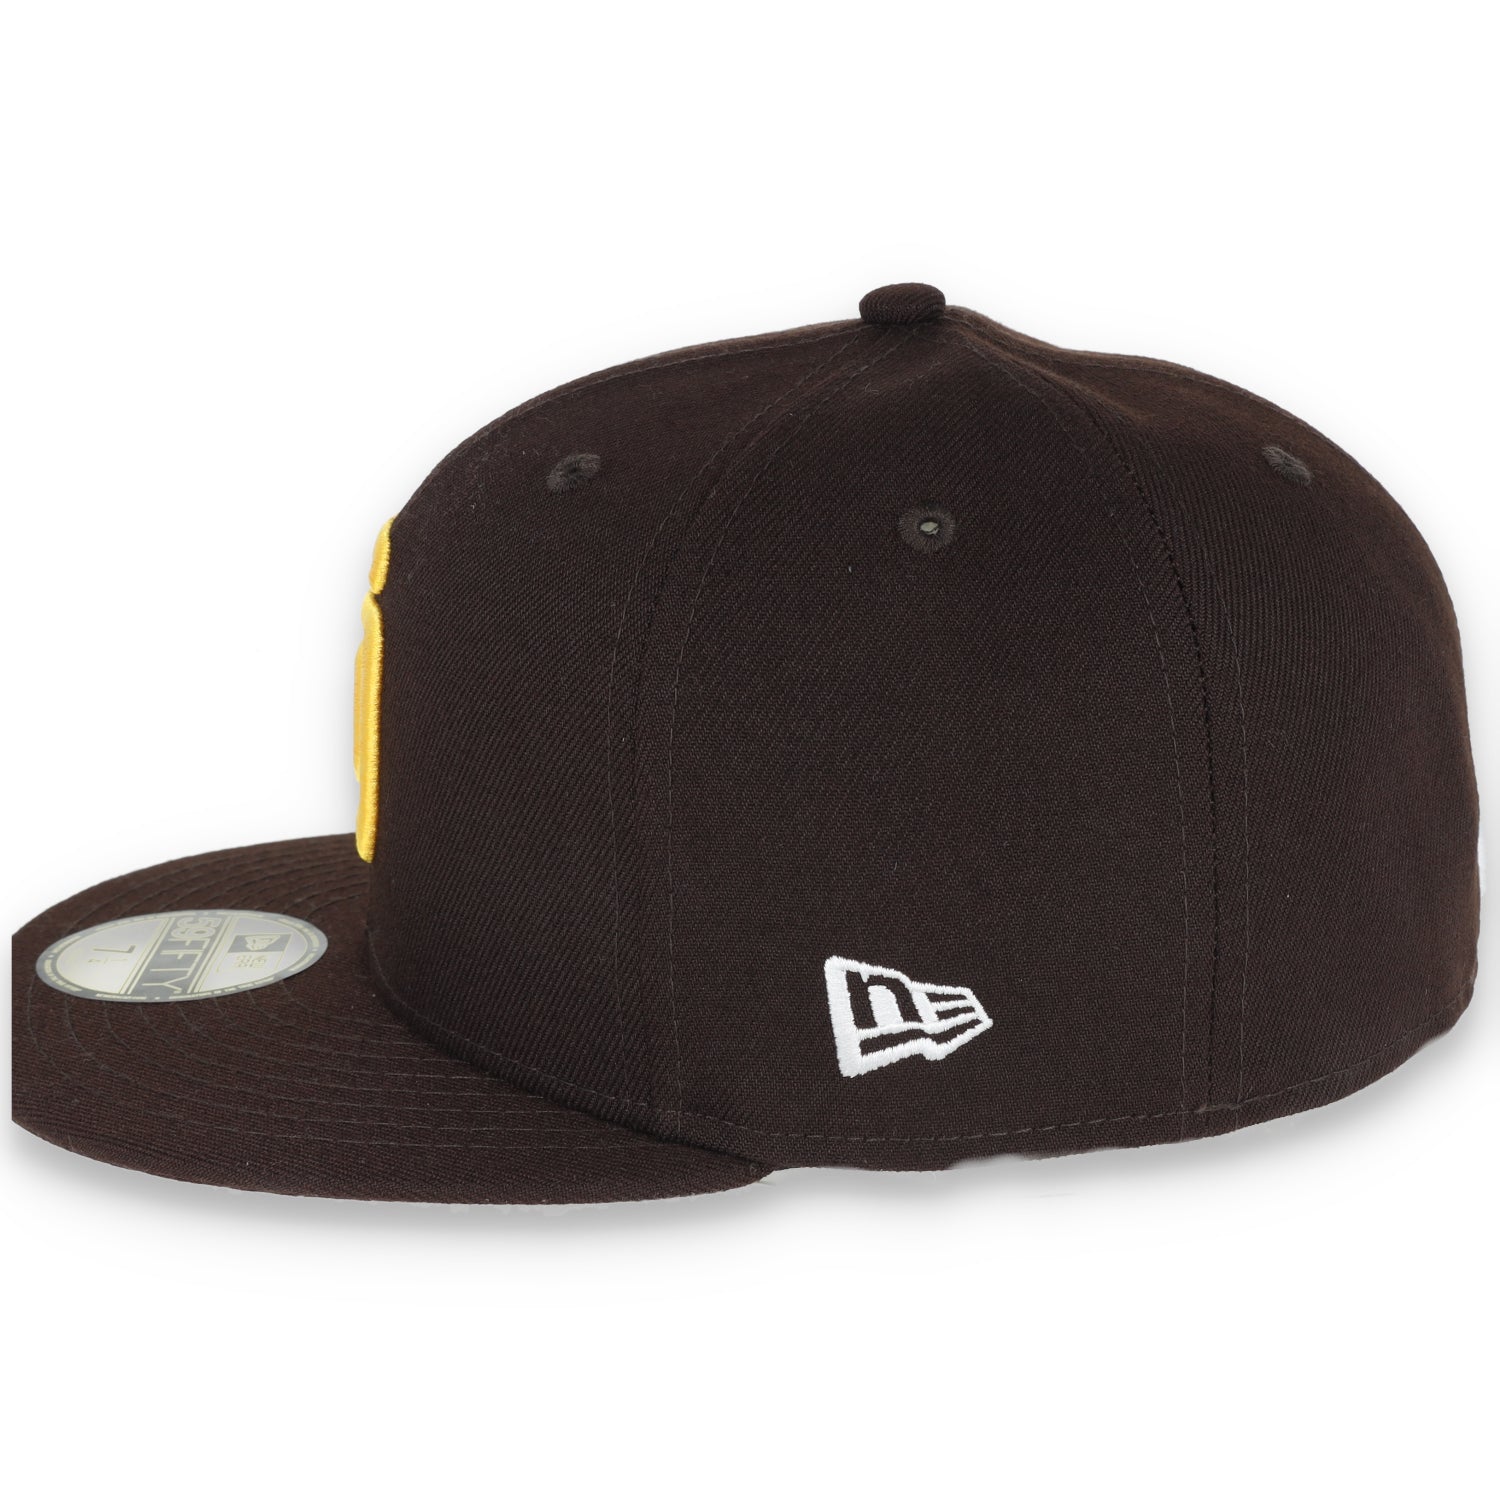 NEW ERA SAN DIEGO PADRES INAUGURAL SEASON PATCH 59FIFTY FITTED HAT